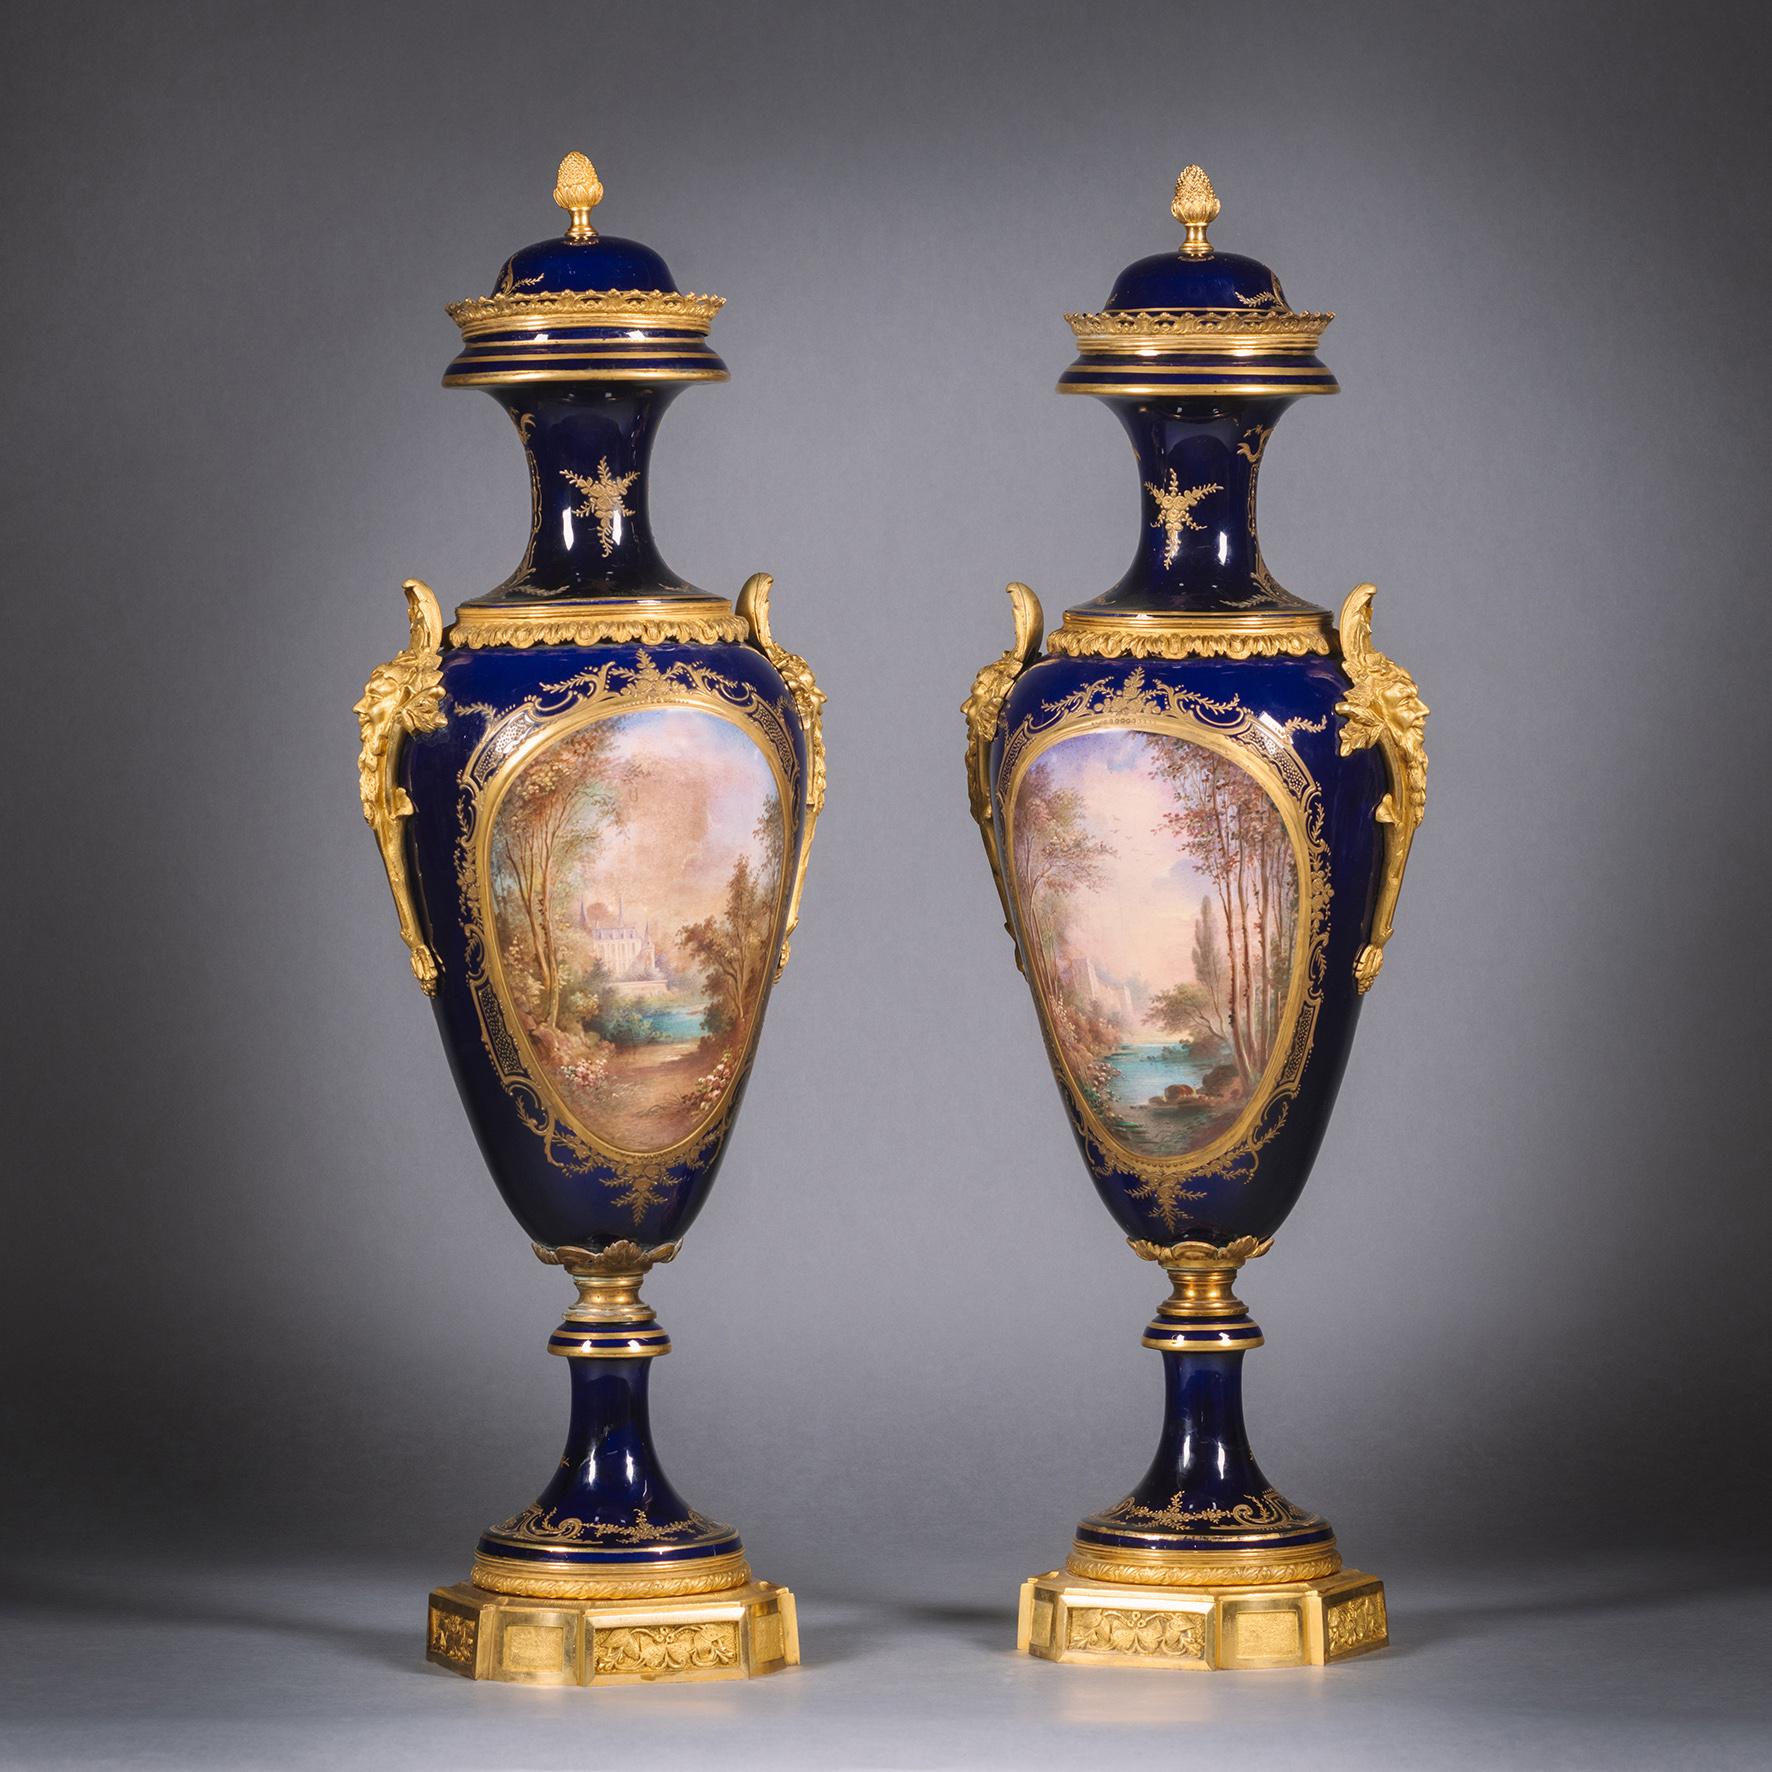 A Fine Pair of Gilt-Bronze Mounted Sèvres Style Porcelain Vases and Covers. 

The painted reserves signed 'G. Poitevin.'. 

This fine pair of pair of vases are of inverted ovoid form with finely painted reserves of 'Fêtes galante' to the front and